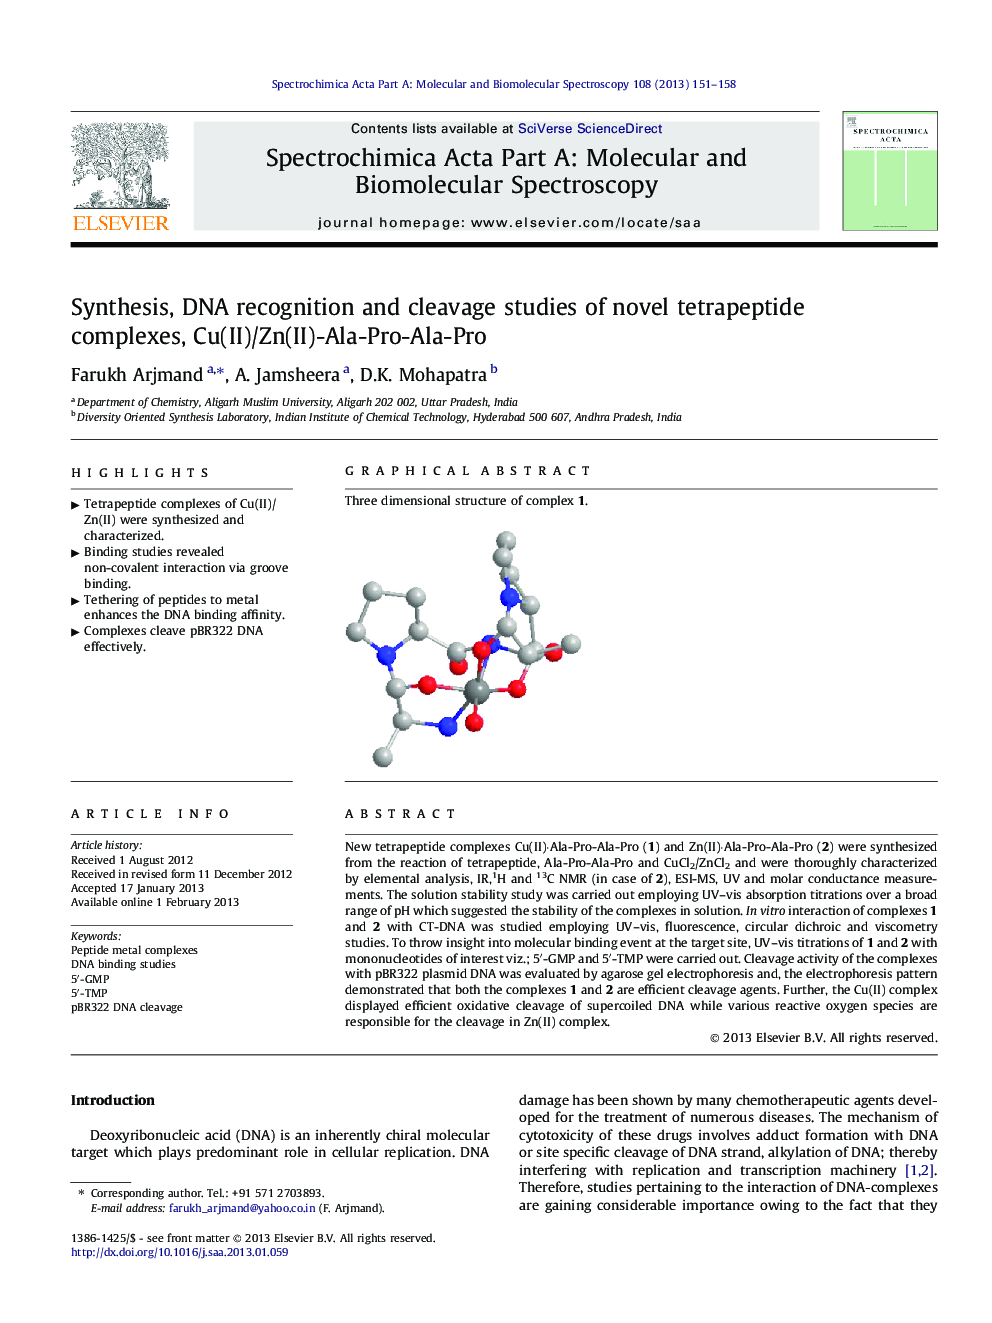 Synthesis, DNA recognition and cleavage studies of novel tetrapeptide complexes, Cu(II)/Zn(II)-Ala-Pro-Ala-Pro